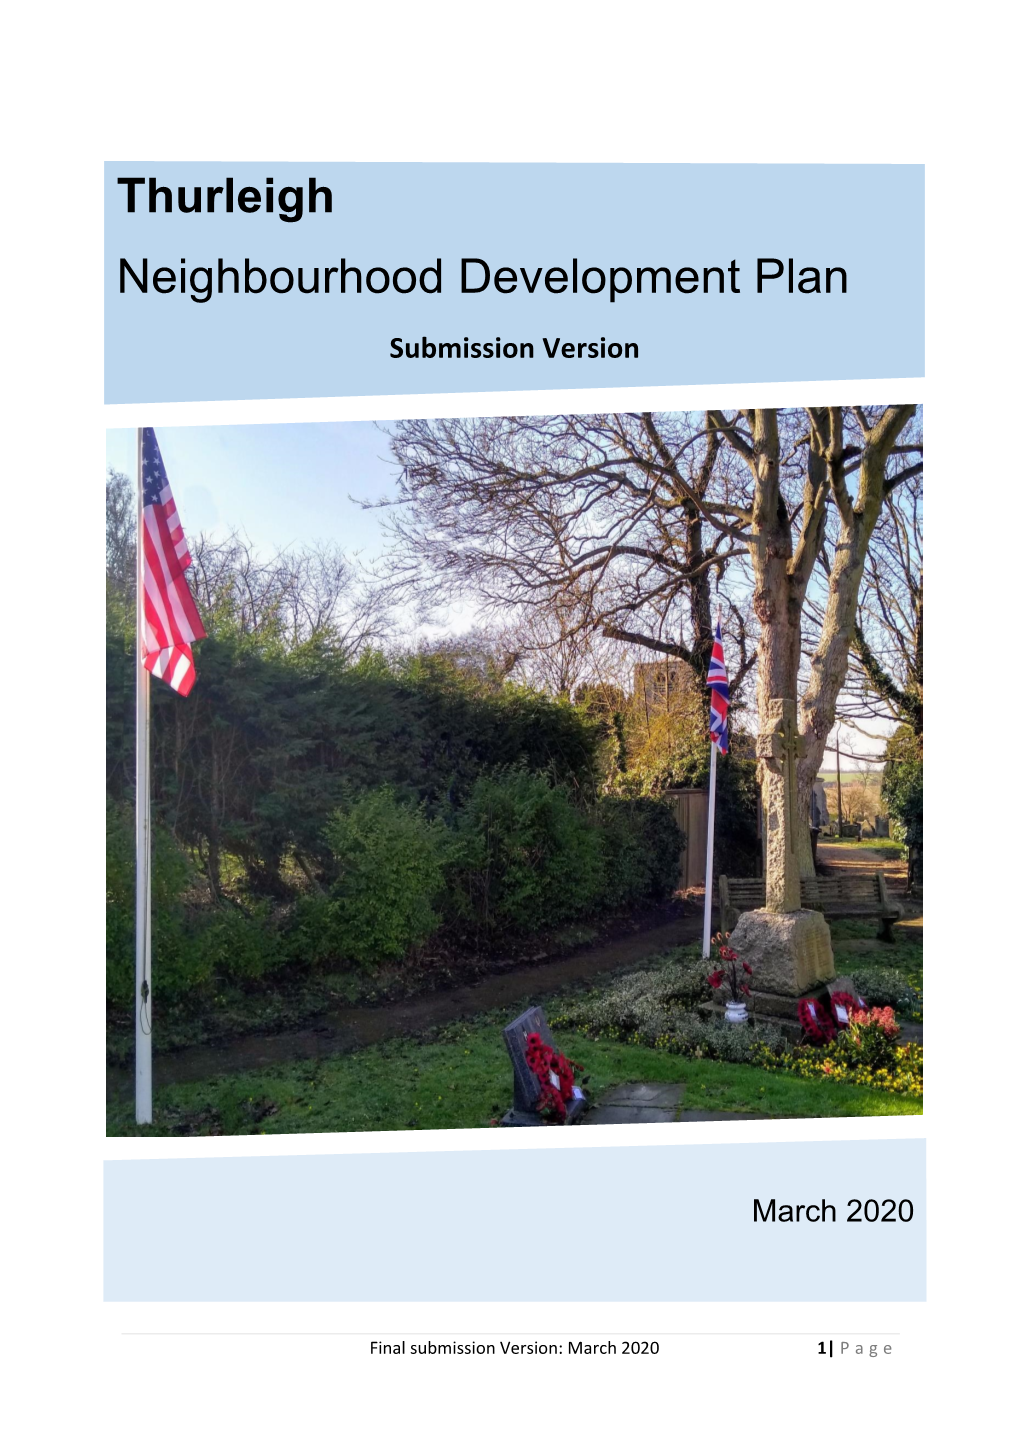 Thurleigh Neighbourhood Plan Has Been Developed with Regard to National Policy, Especially the National Planning Policy Framework